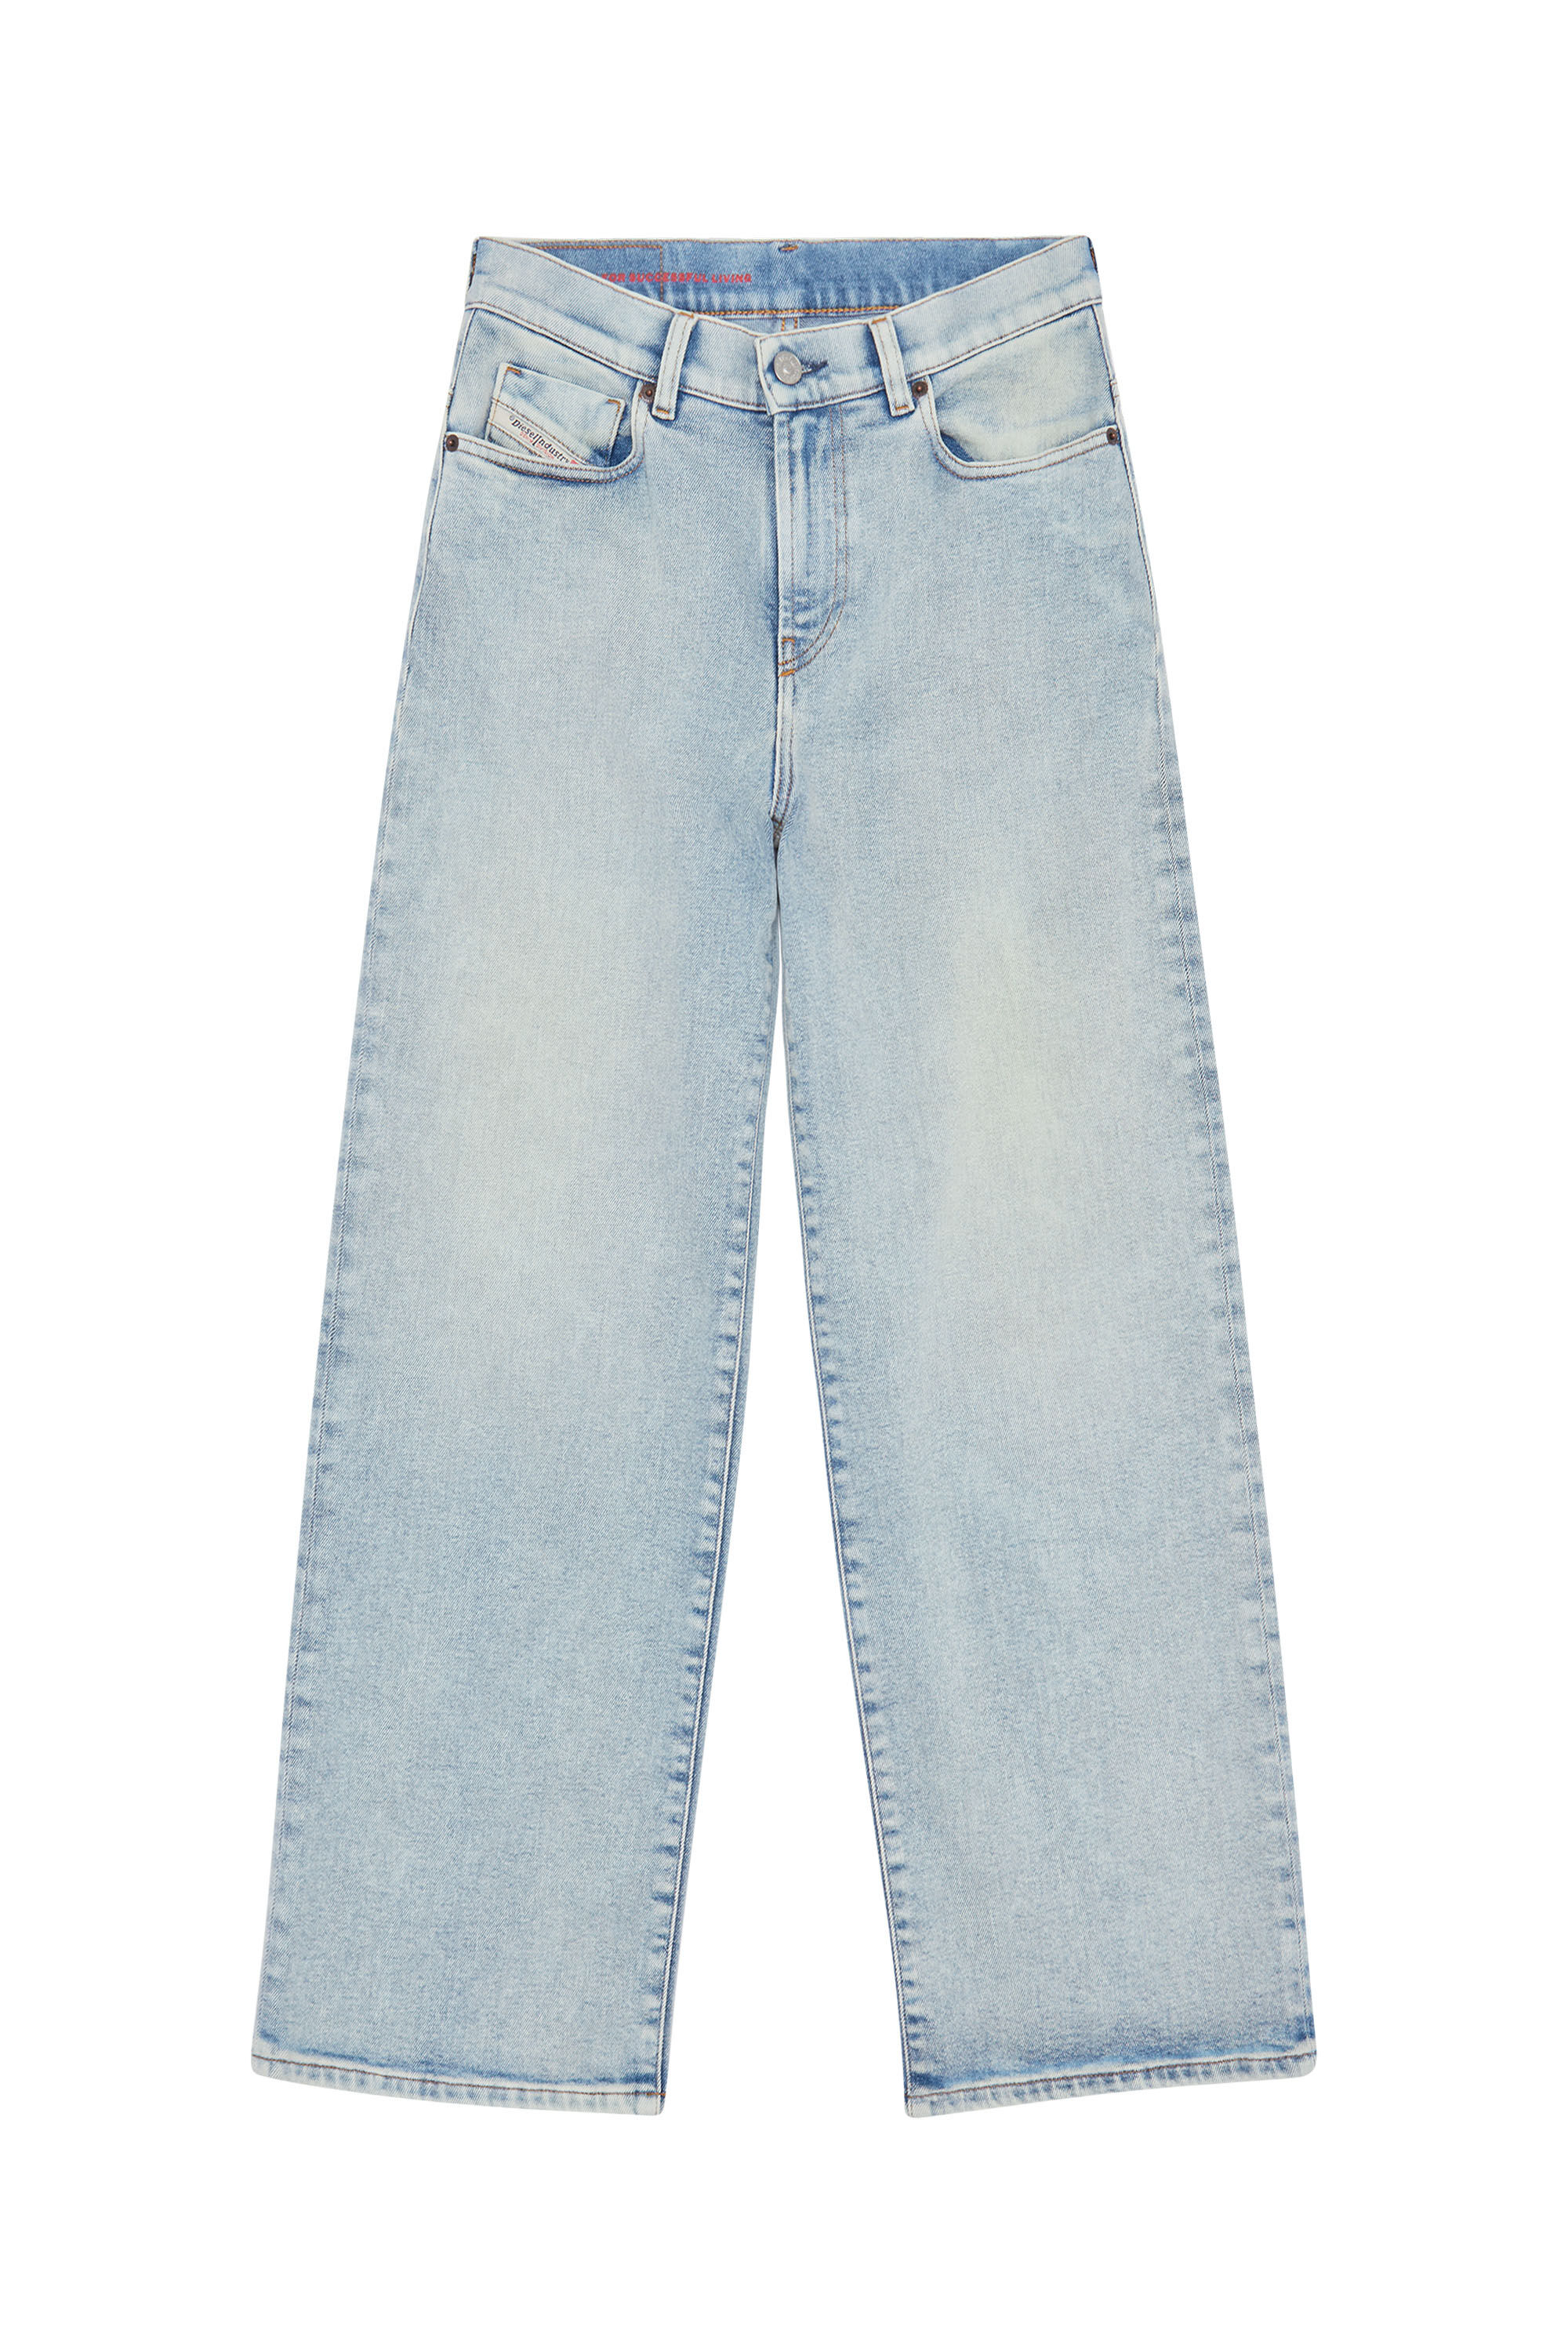 Diesel - 2000 Widee 09C08 Bootcut and Flare Jeans,  - Image 2